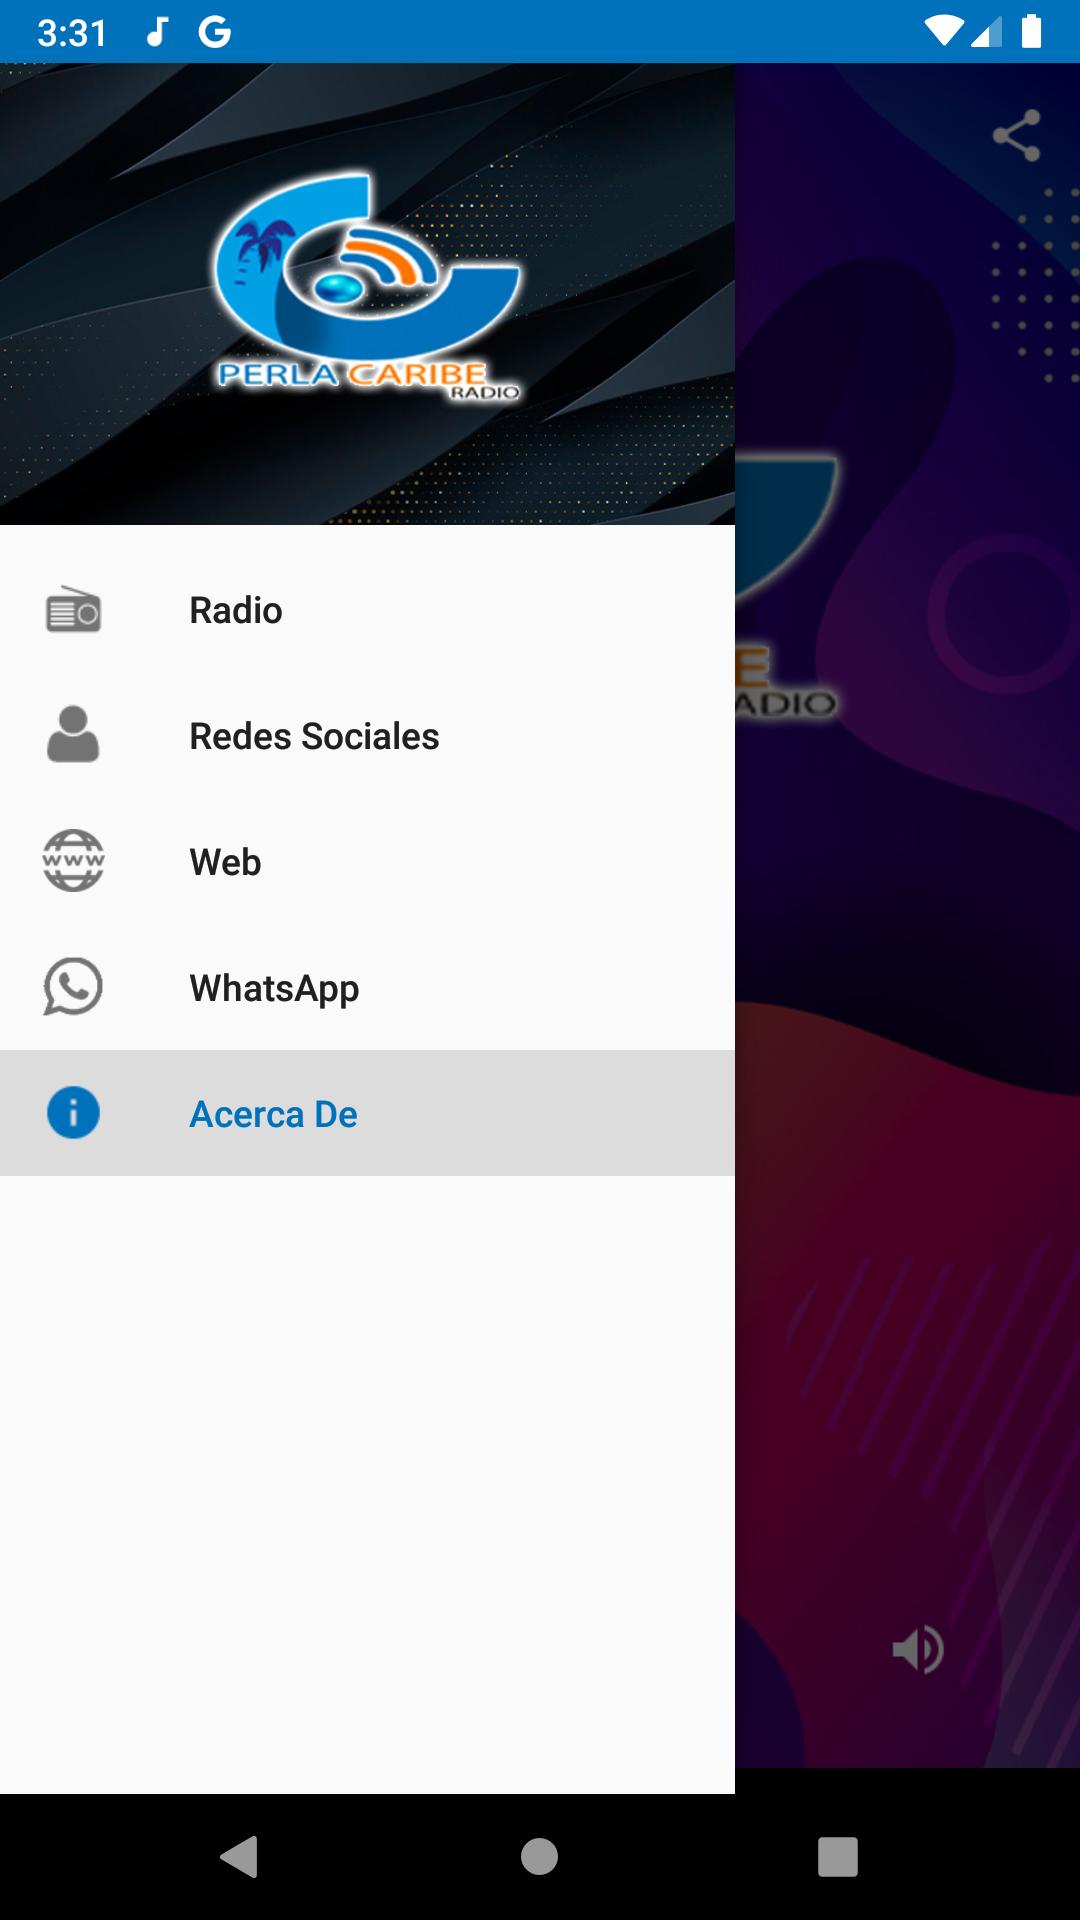 Perla Caribe Radio for Android - APK Download